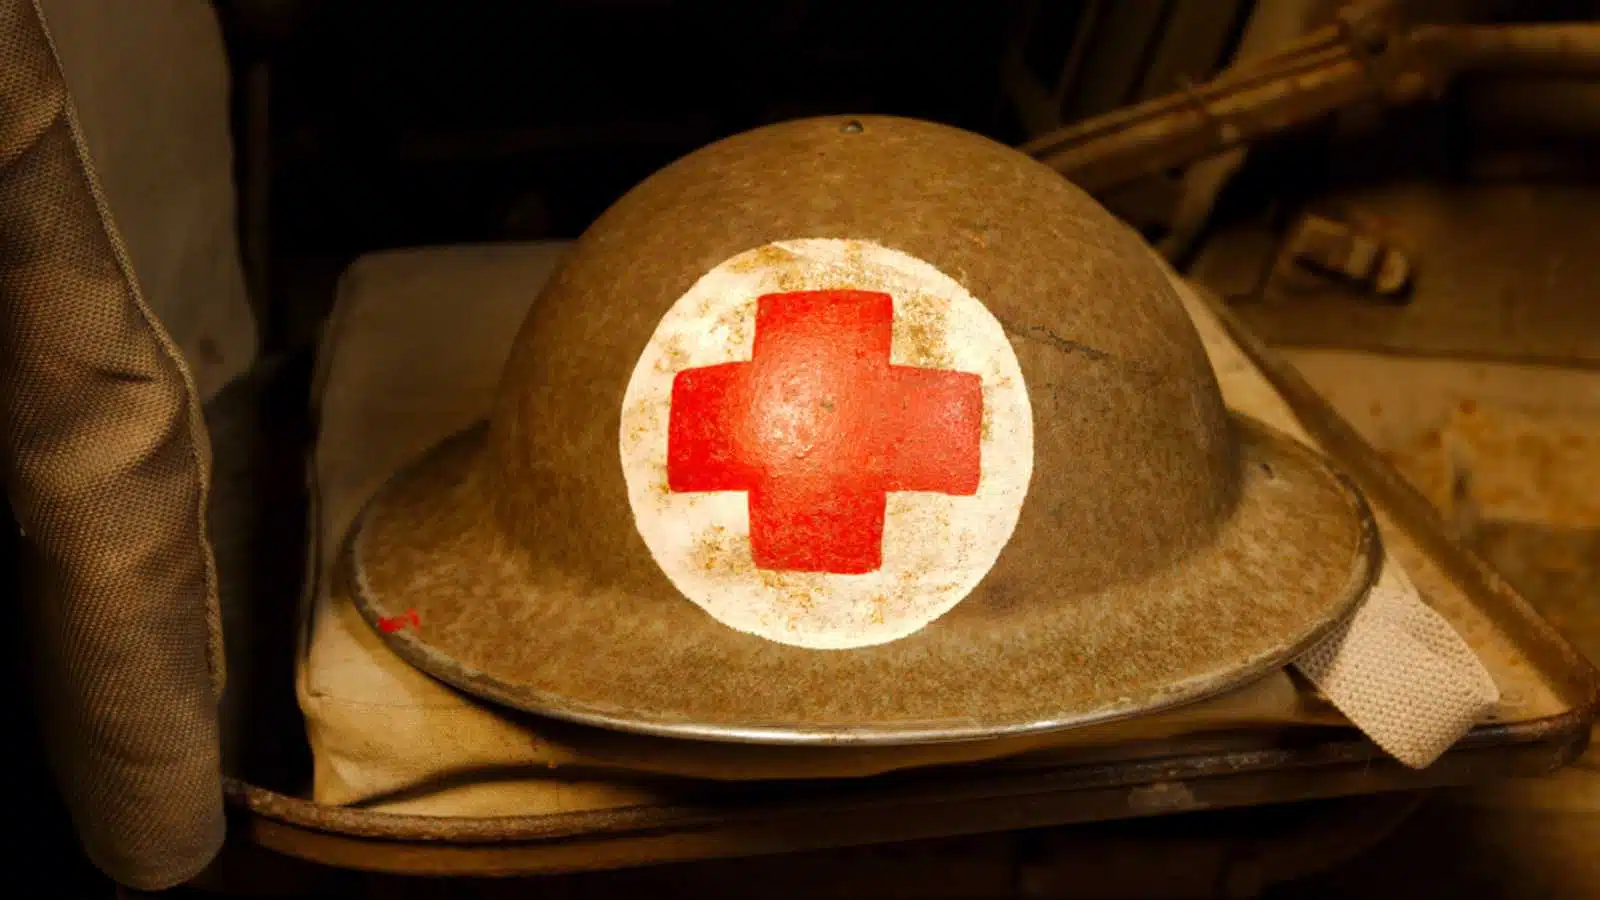 Cobbaton, Devon, UK - 20th April 2019: A World War 2 British soldiers helmet with a red cross on a white background painted on it